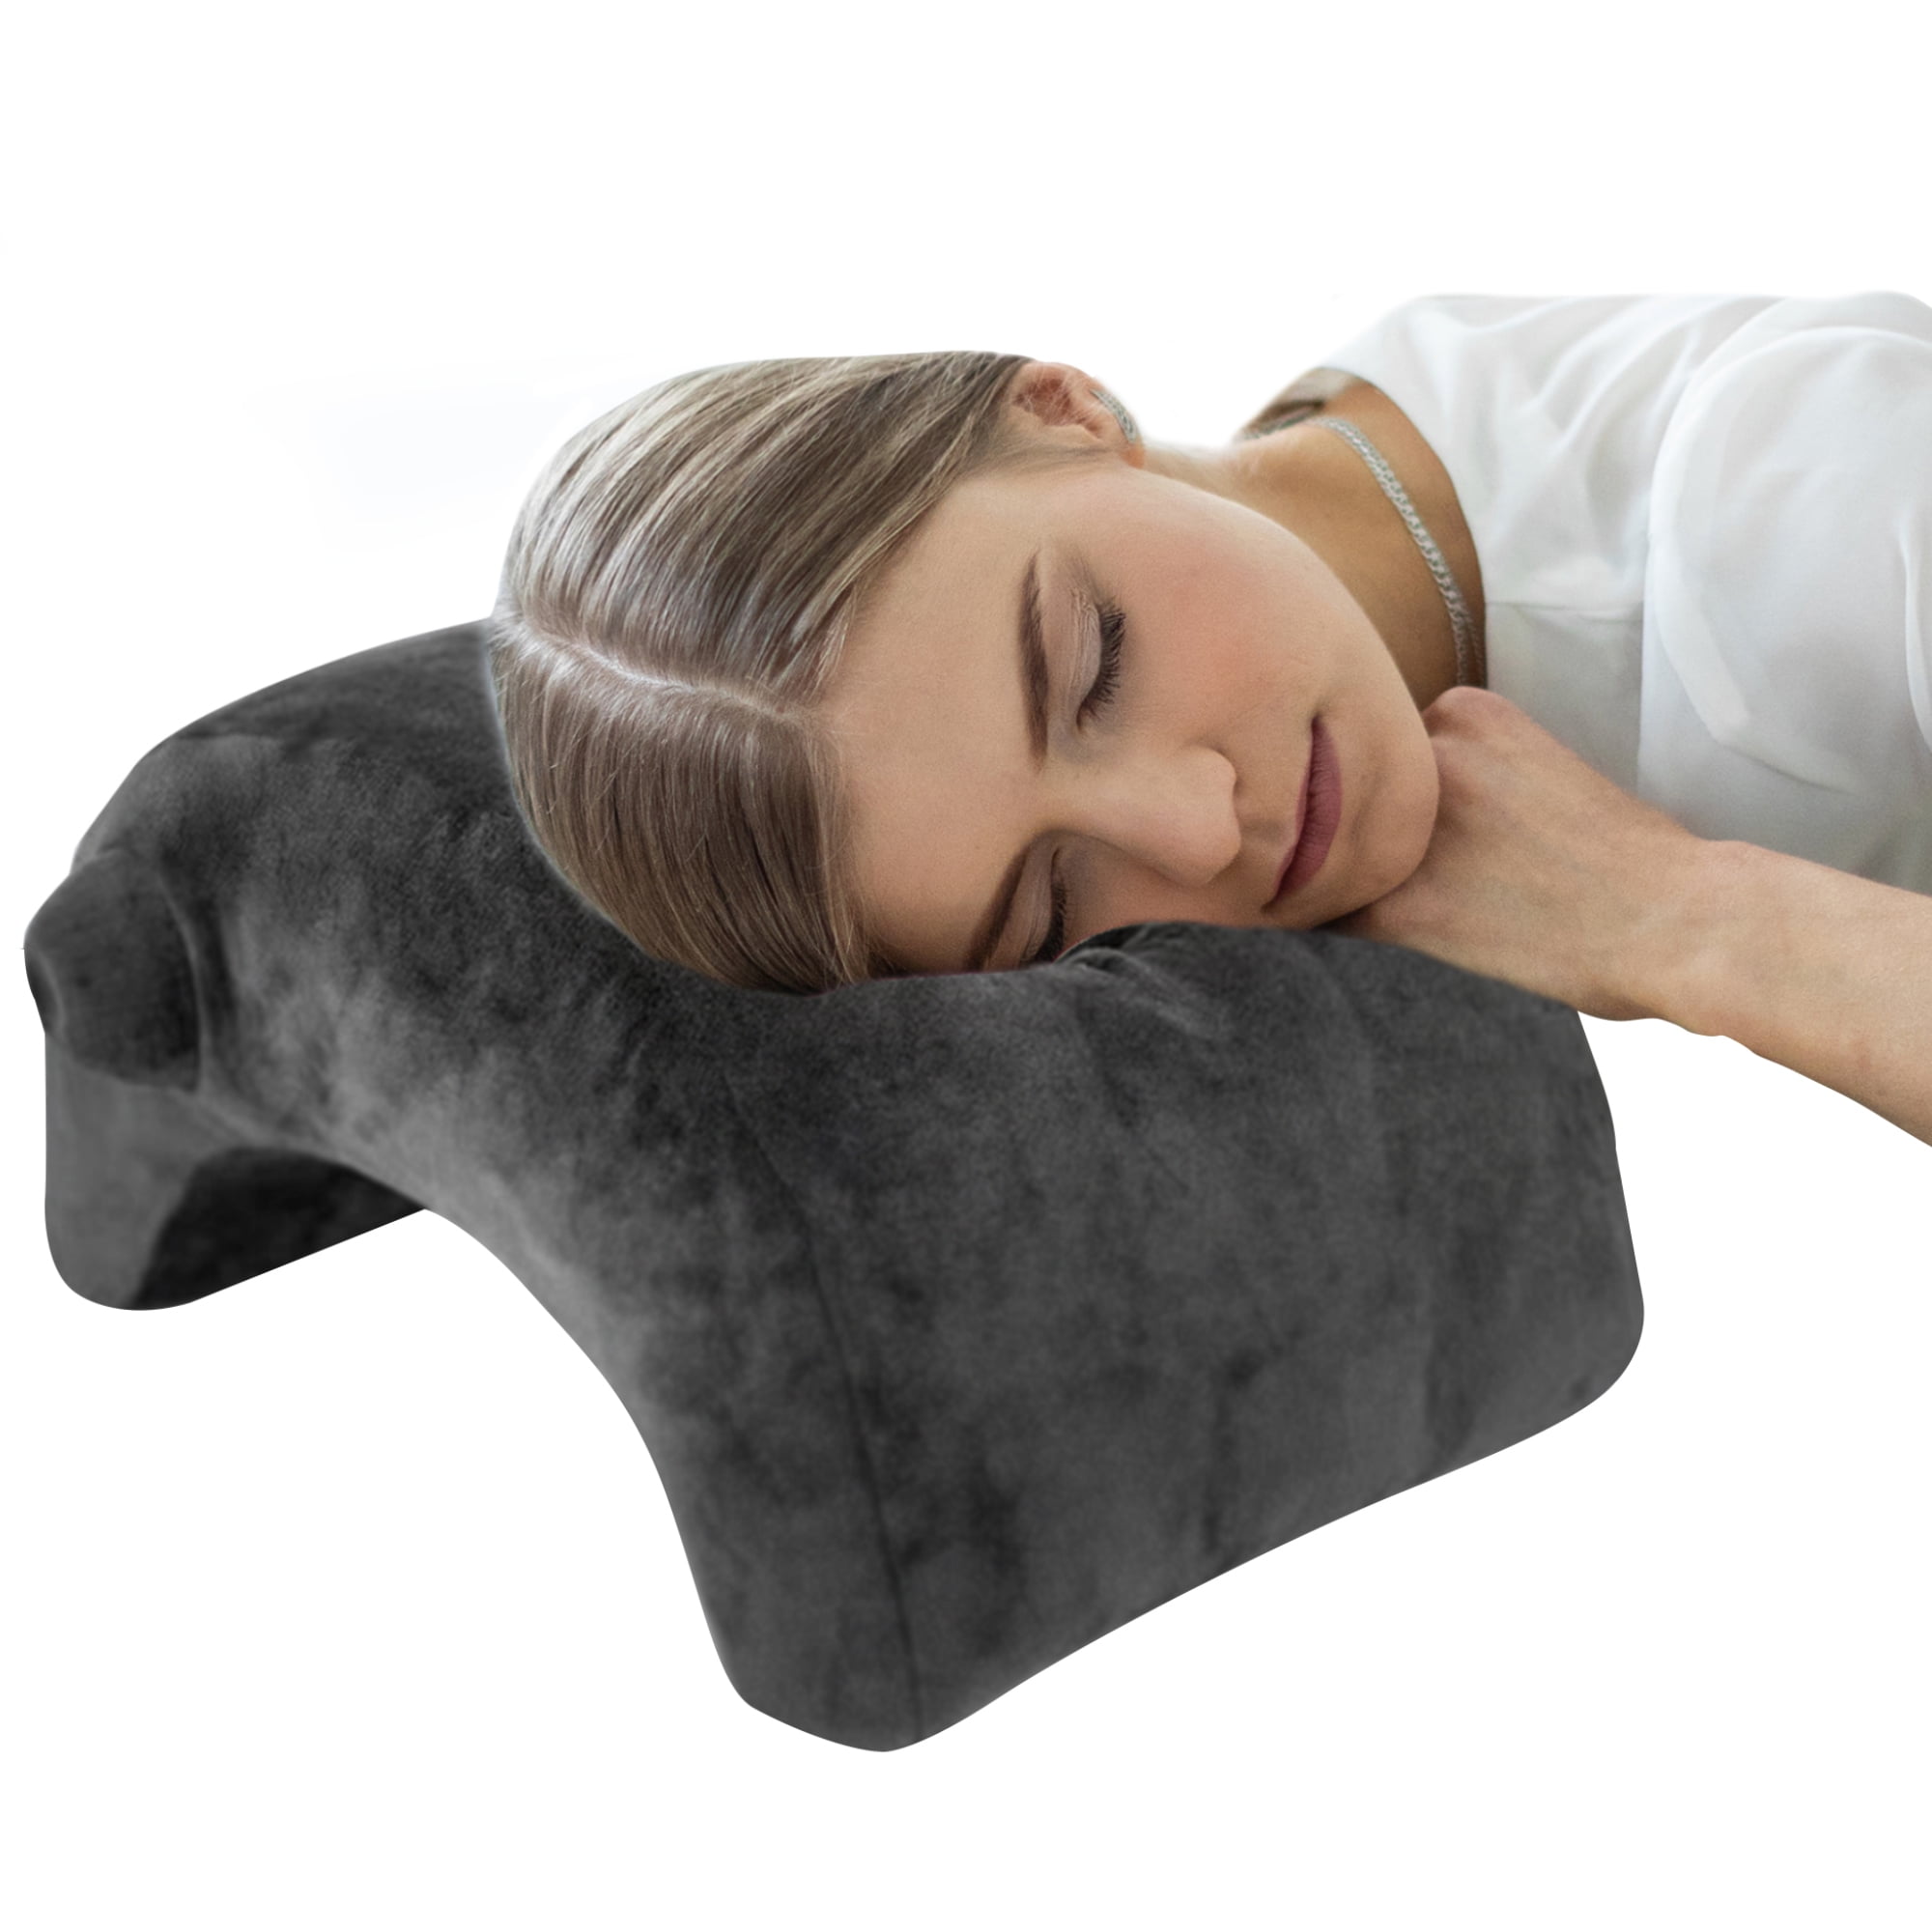 Total Pillow New Hug Travel Pillow, Adjustable Fleece Neck Pillow with Head Support, Great for Lumbar Support, Tech Neck, Side Sleeping, Airplane or